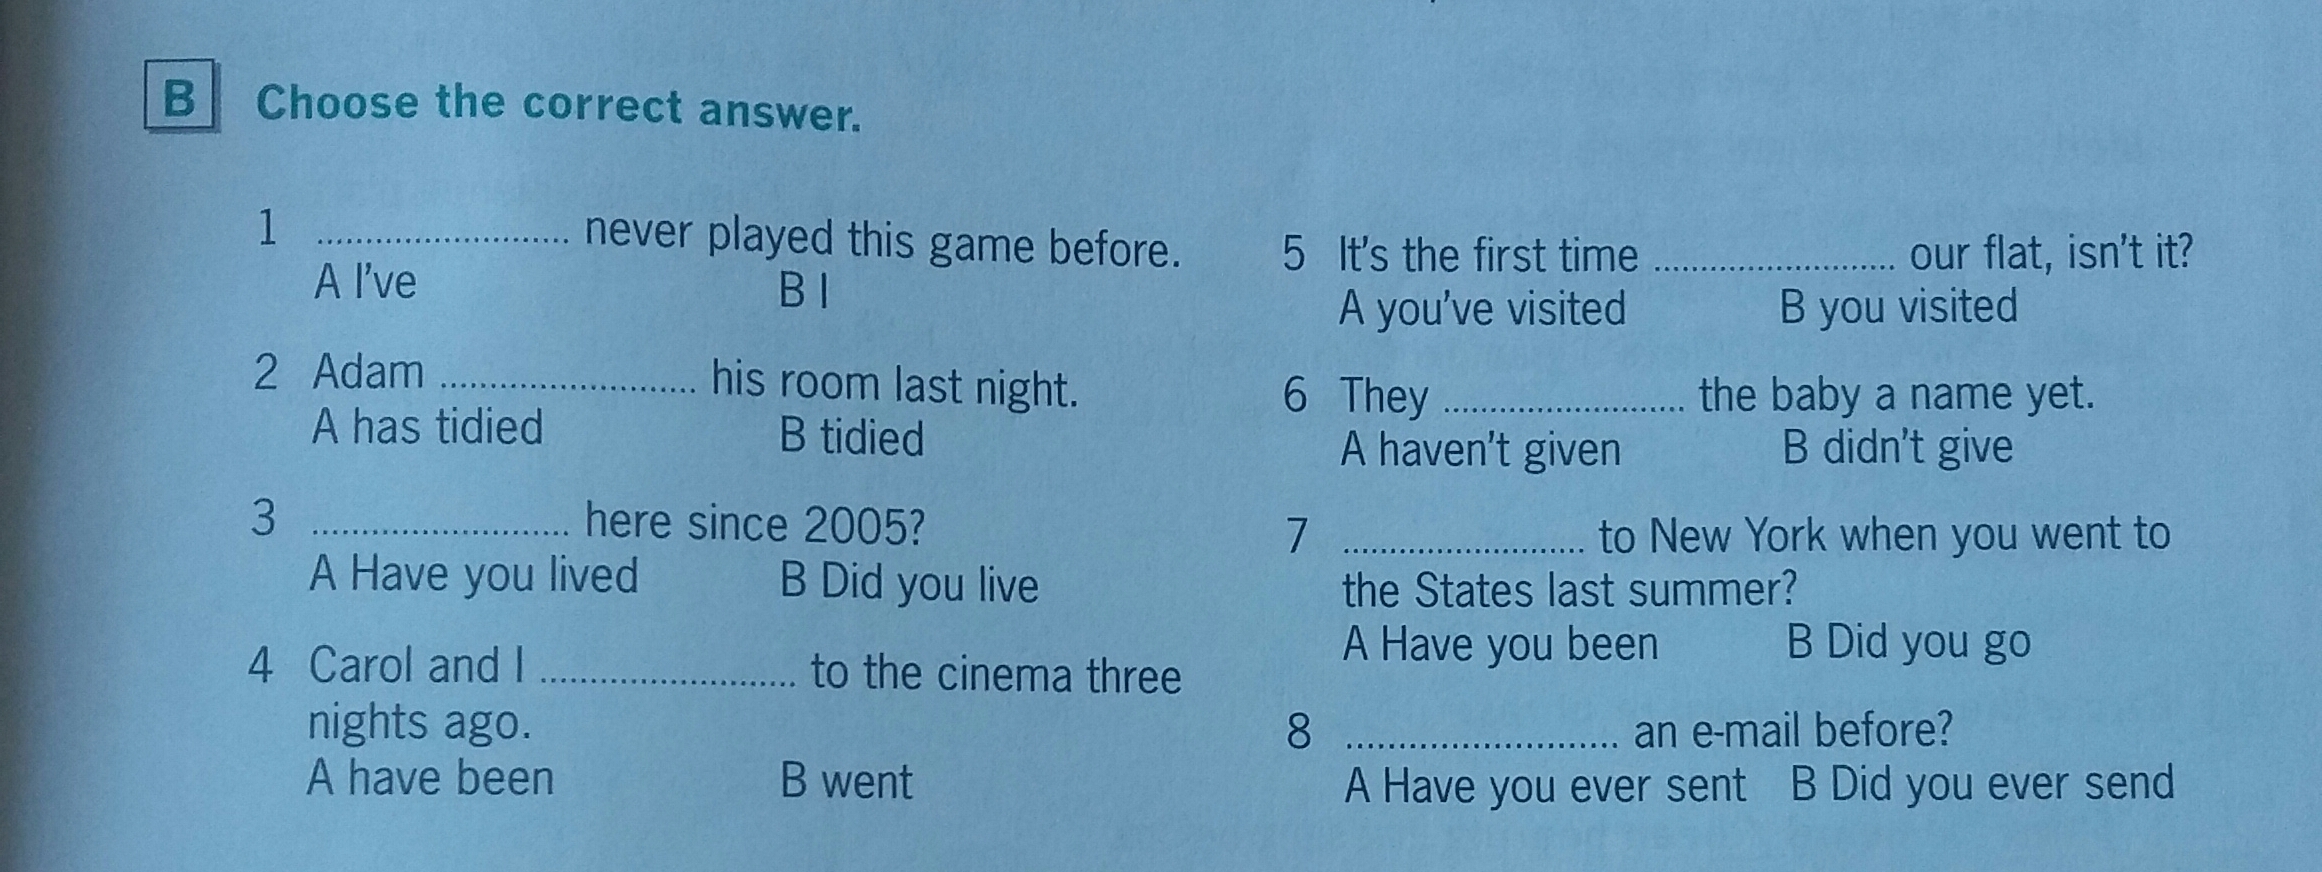 You go to the cinema last night. Choose the correct answer. Срщщыу еру сщккусе фтыцук. Never Played this game before. I've never Played this game before what do we have to do.